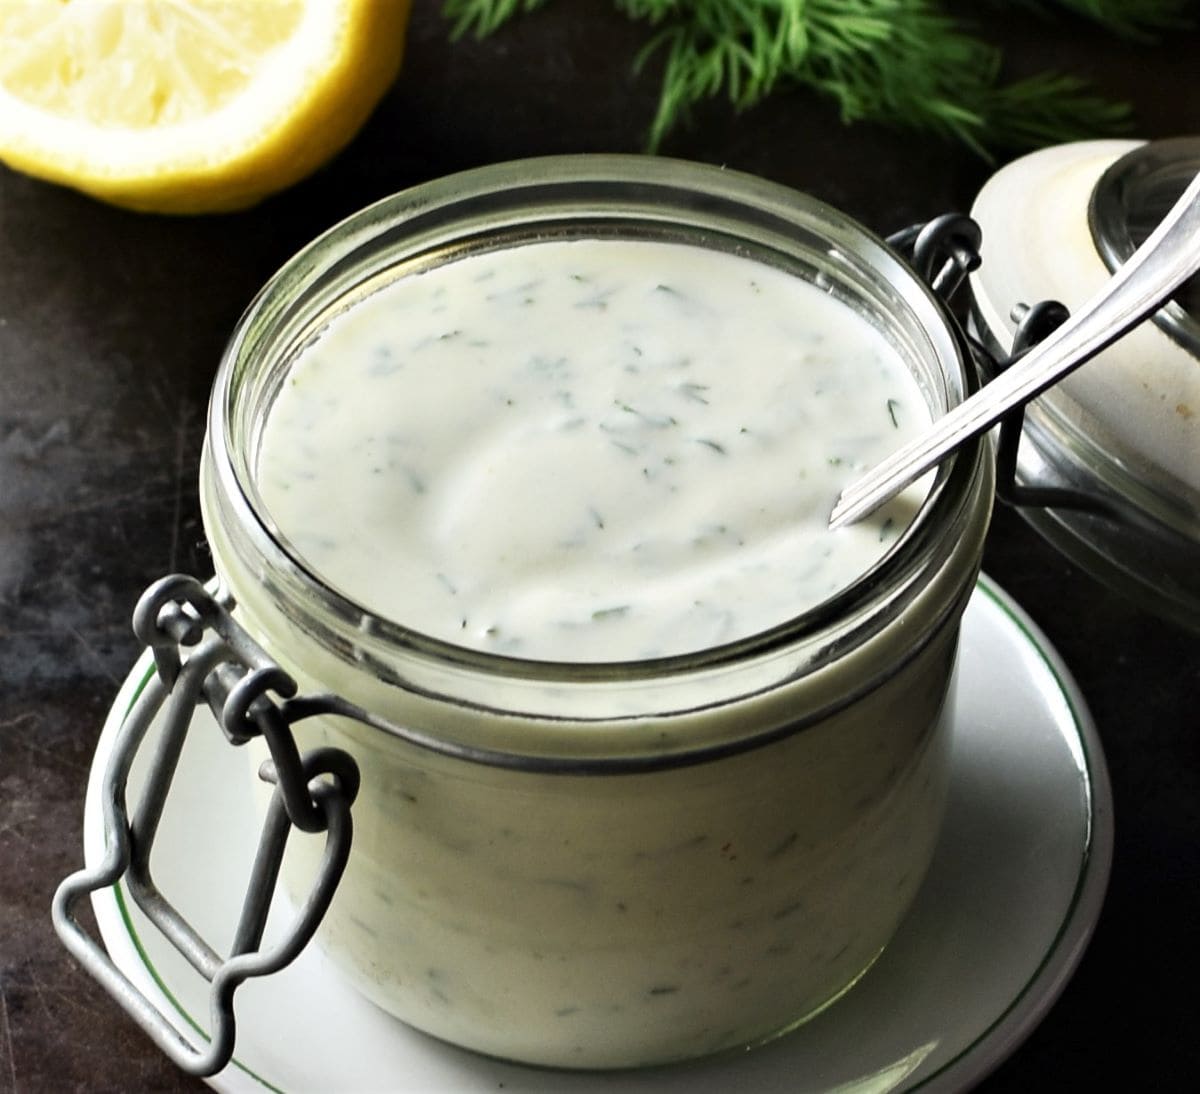 Close-up view of ranch dressing in open jar with spoon.